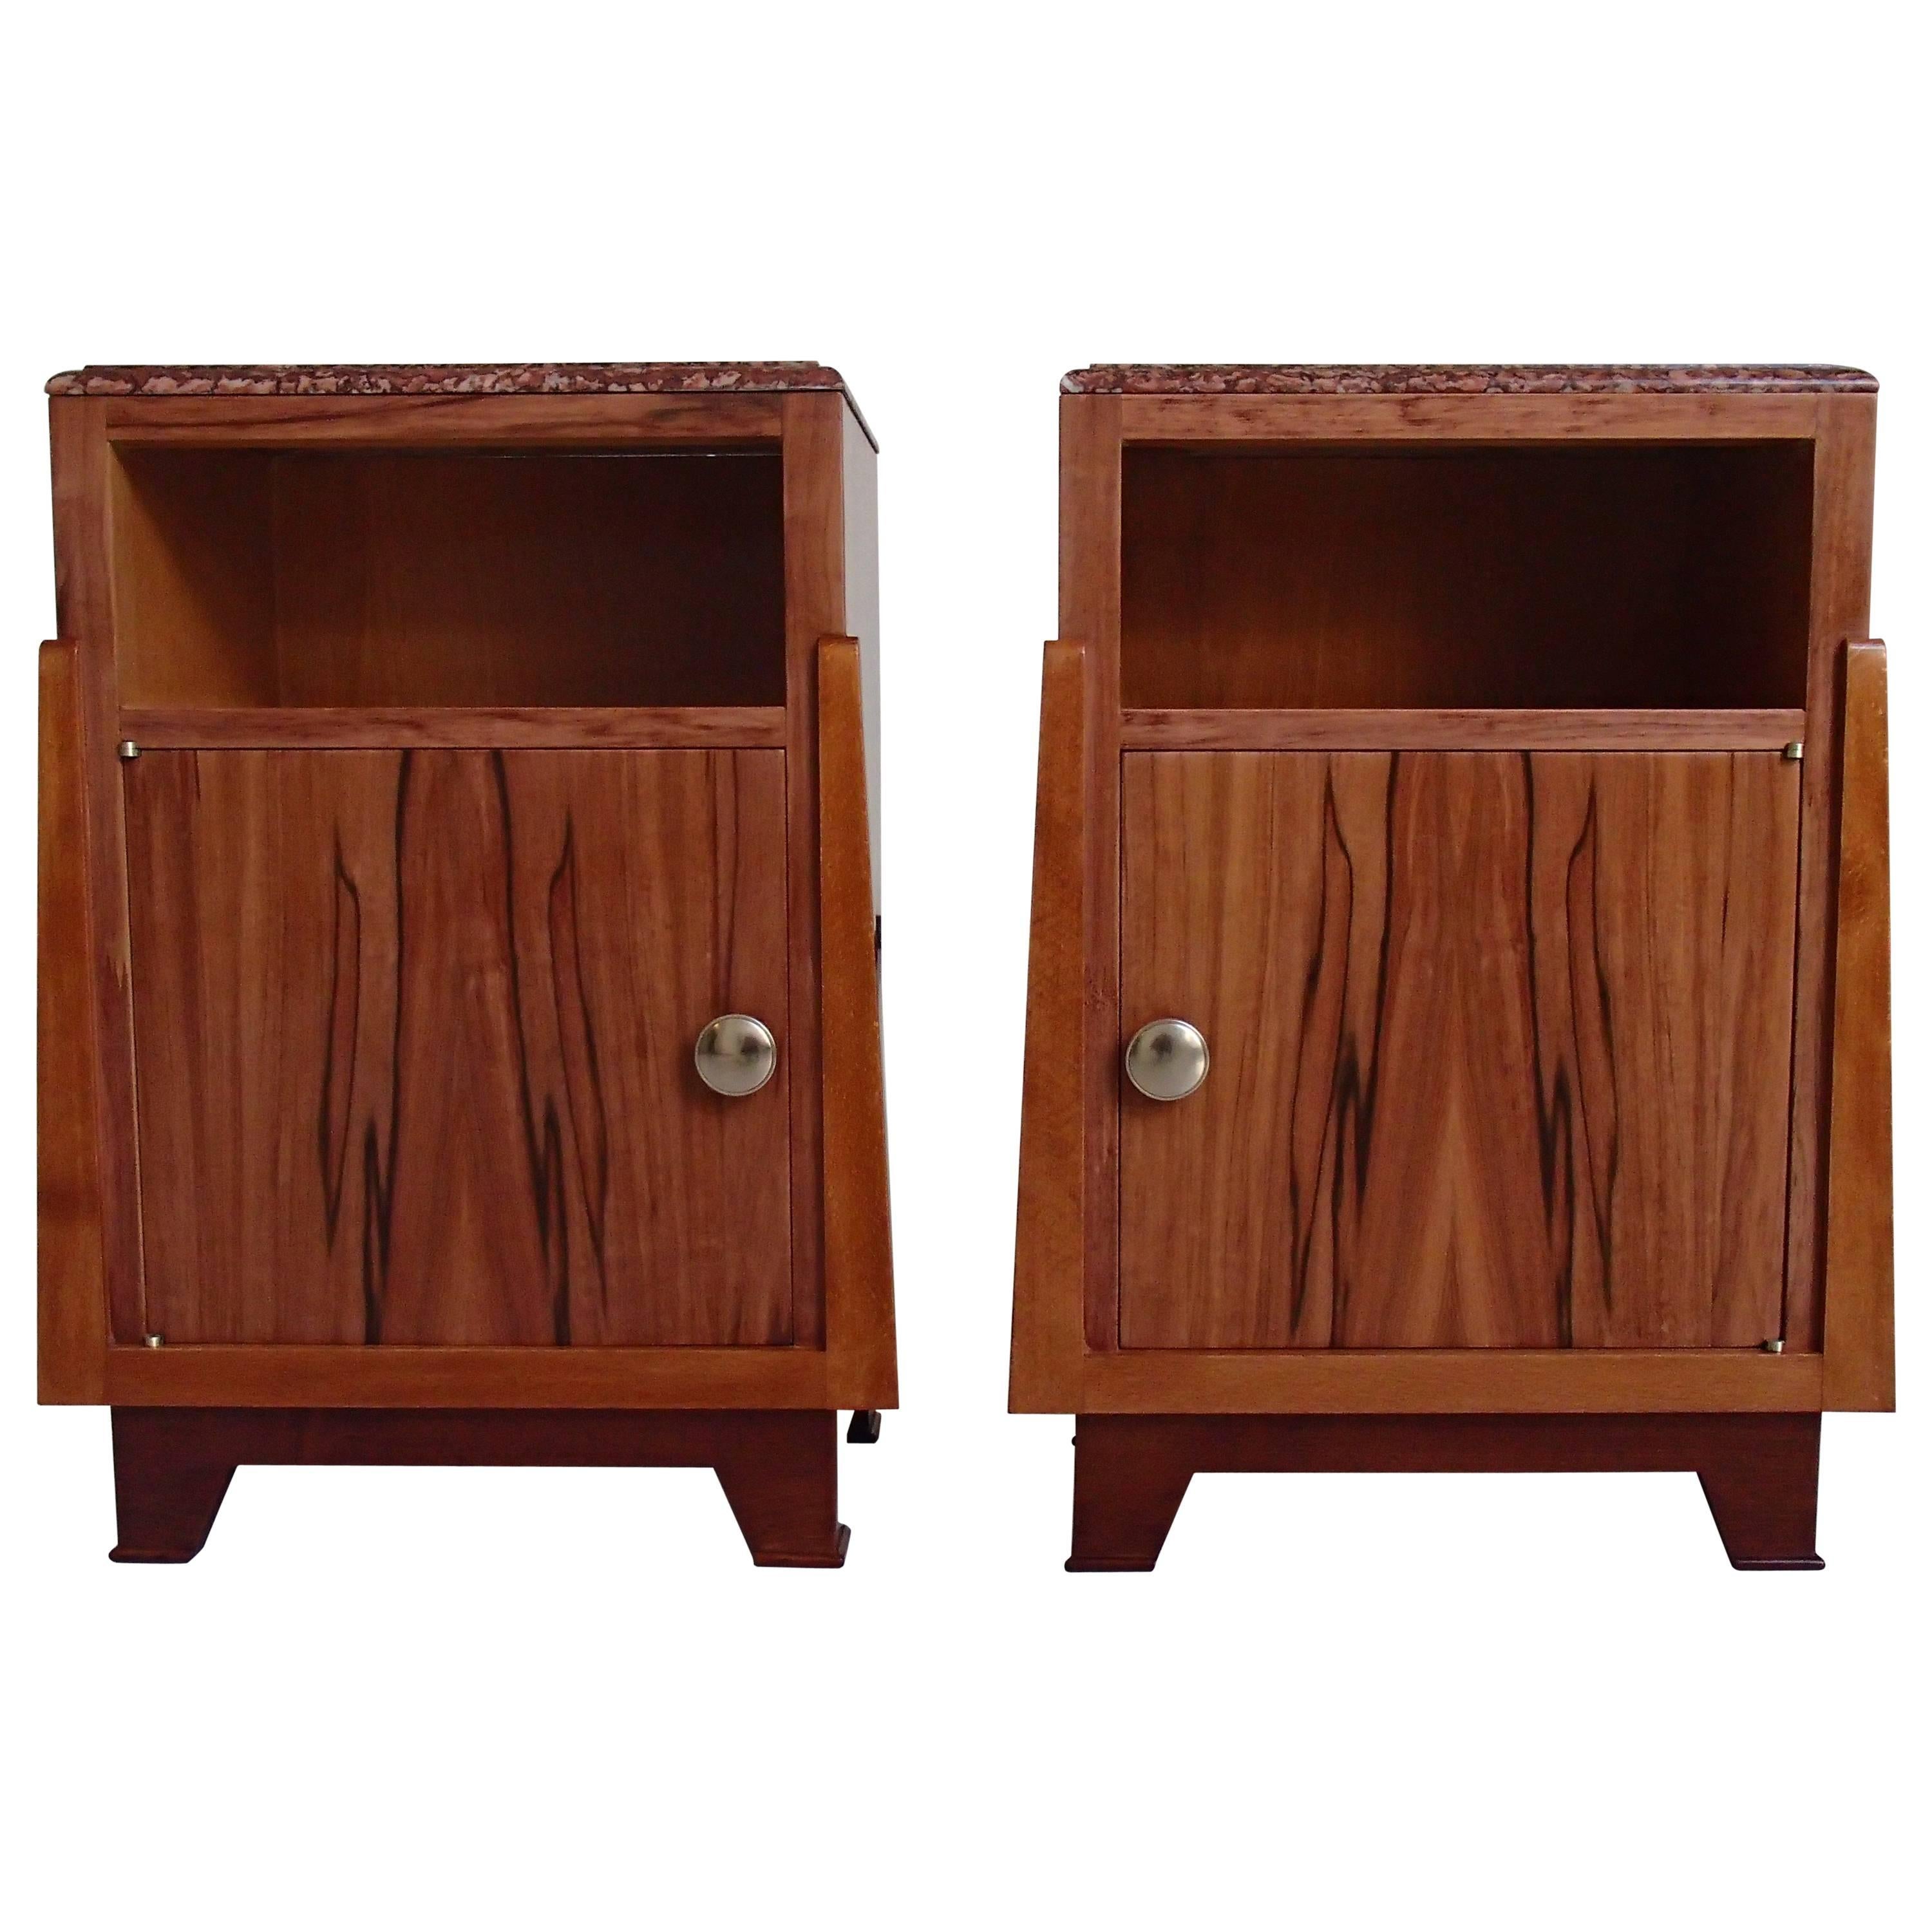 1930 Cubist Pair Nightstands Side Table Apple Wood Red Marble Top For Sale